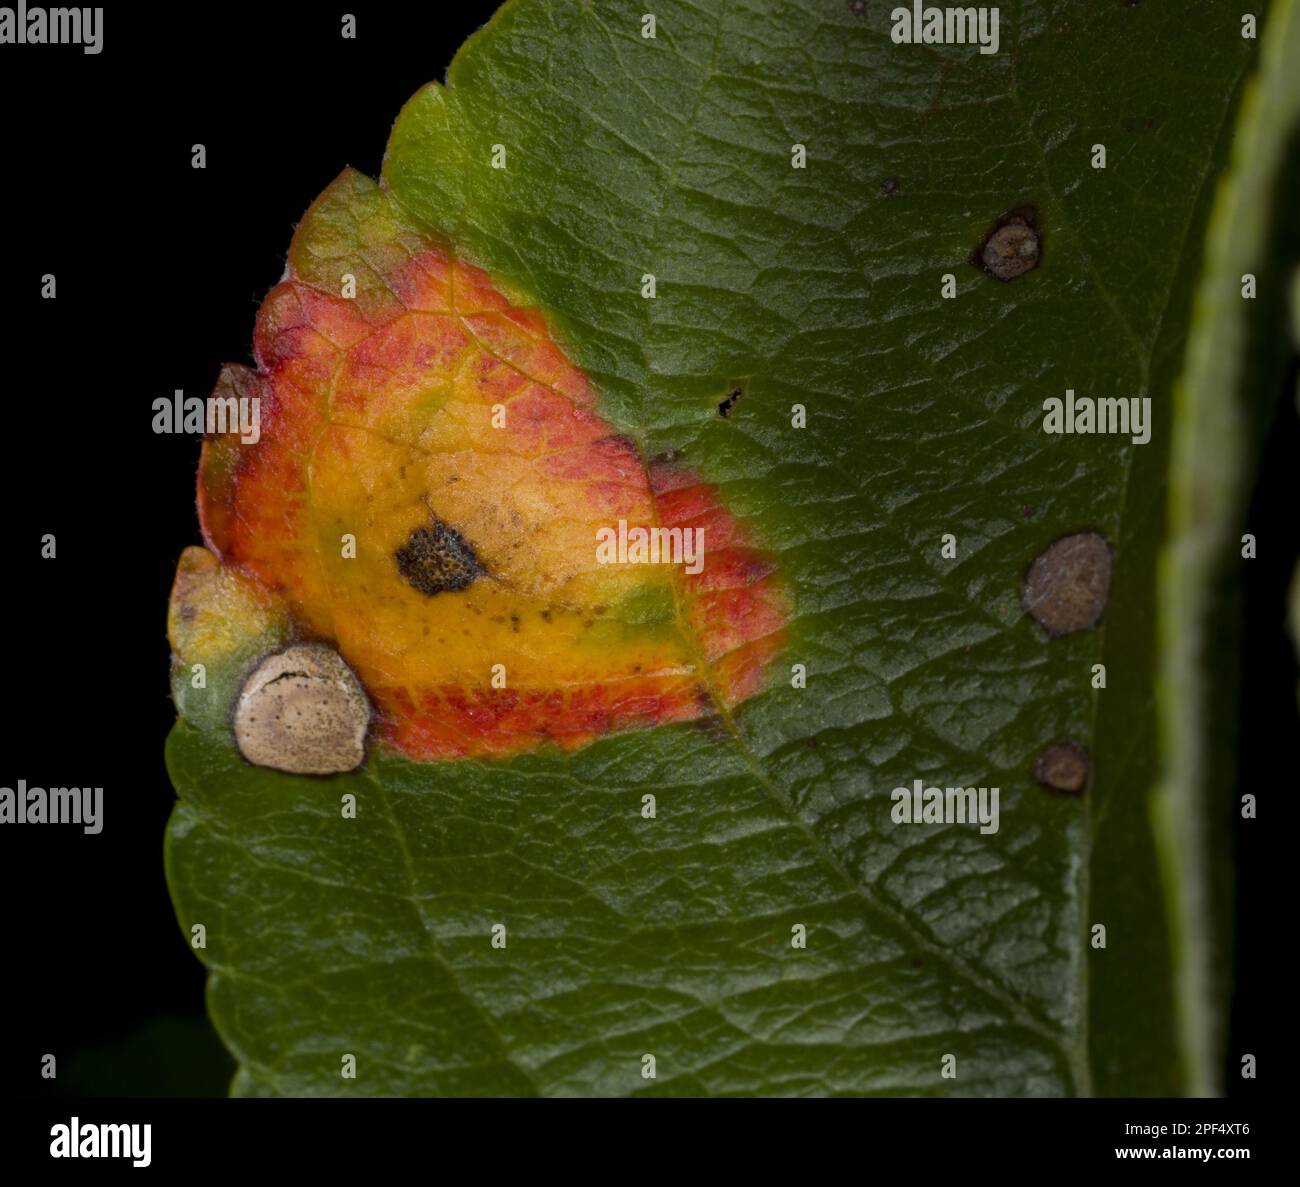 Cultivated Apple (Malus domestica) 'McIntosh', close-up of leaf, with Frogeye (Sphaeropsis sp.) Leaf Spot, Ottawa, Ontario, Canada Stock Photo